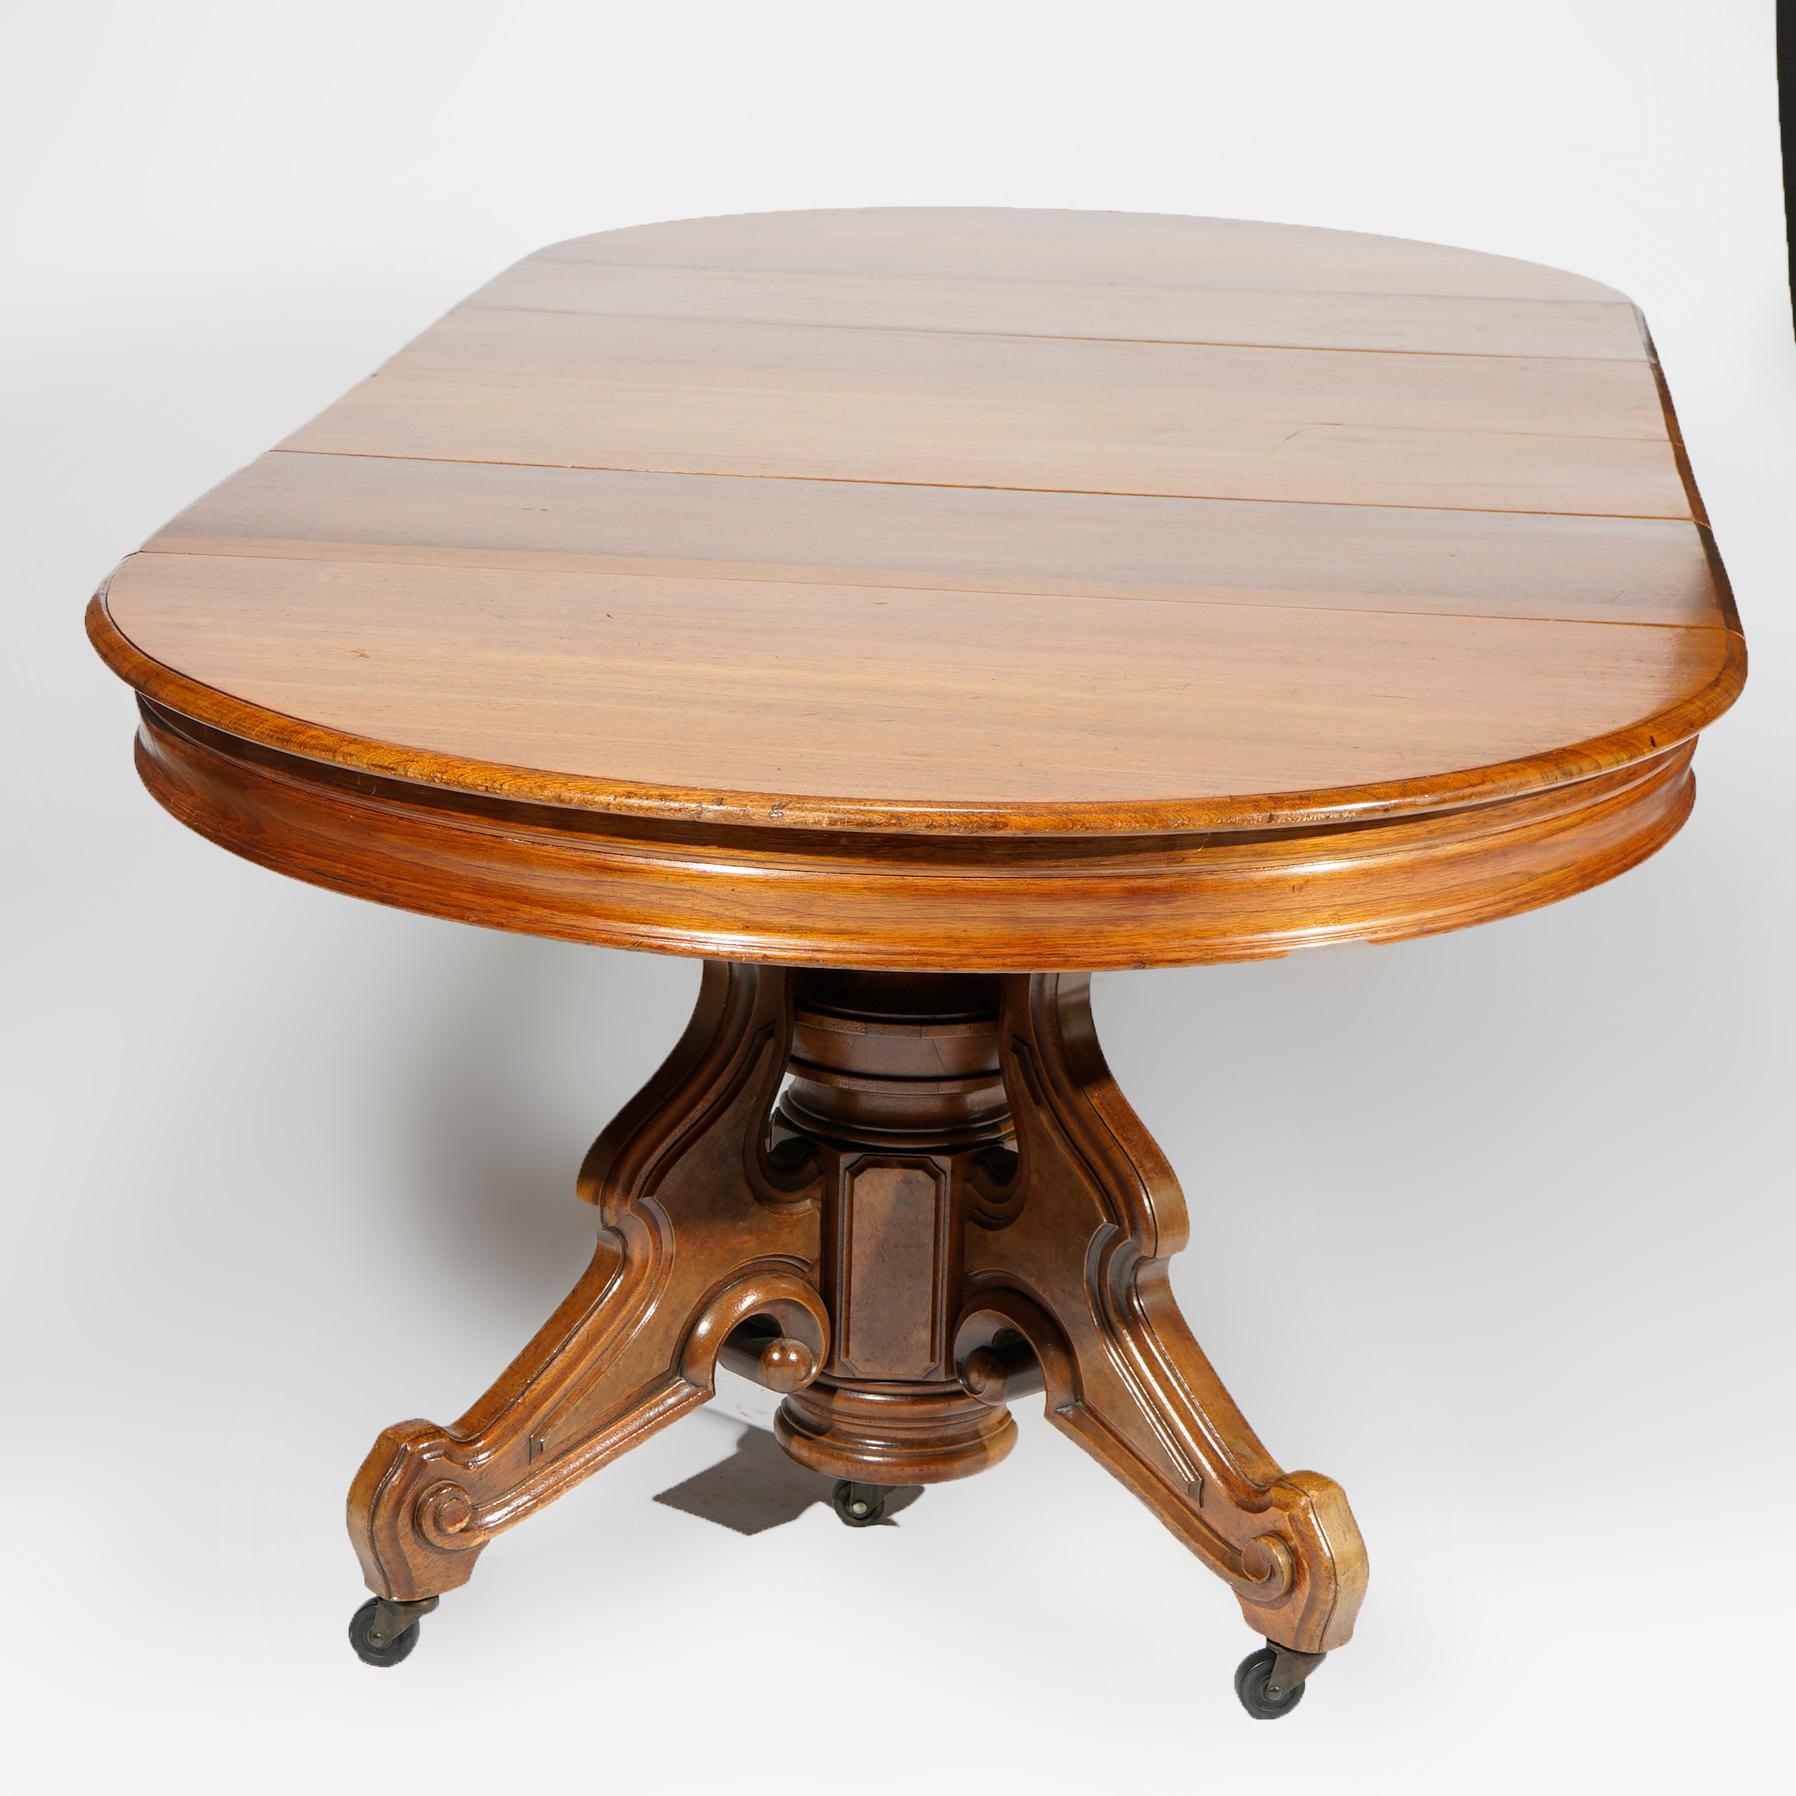 19th Century Antique Victorian Round Walnut Extension Dining Table with Six Leaves 19th C